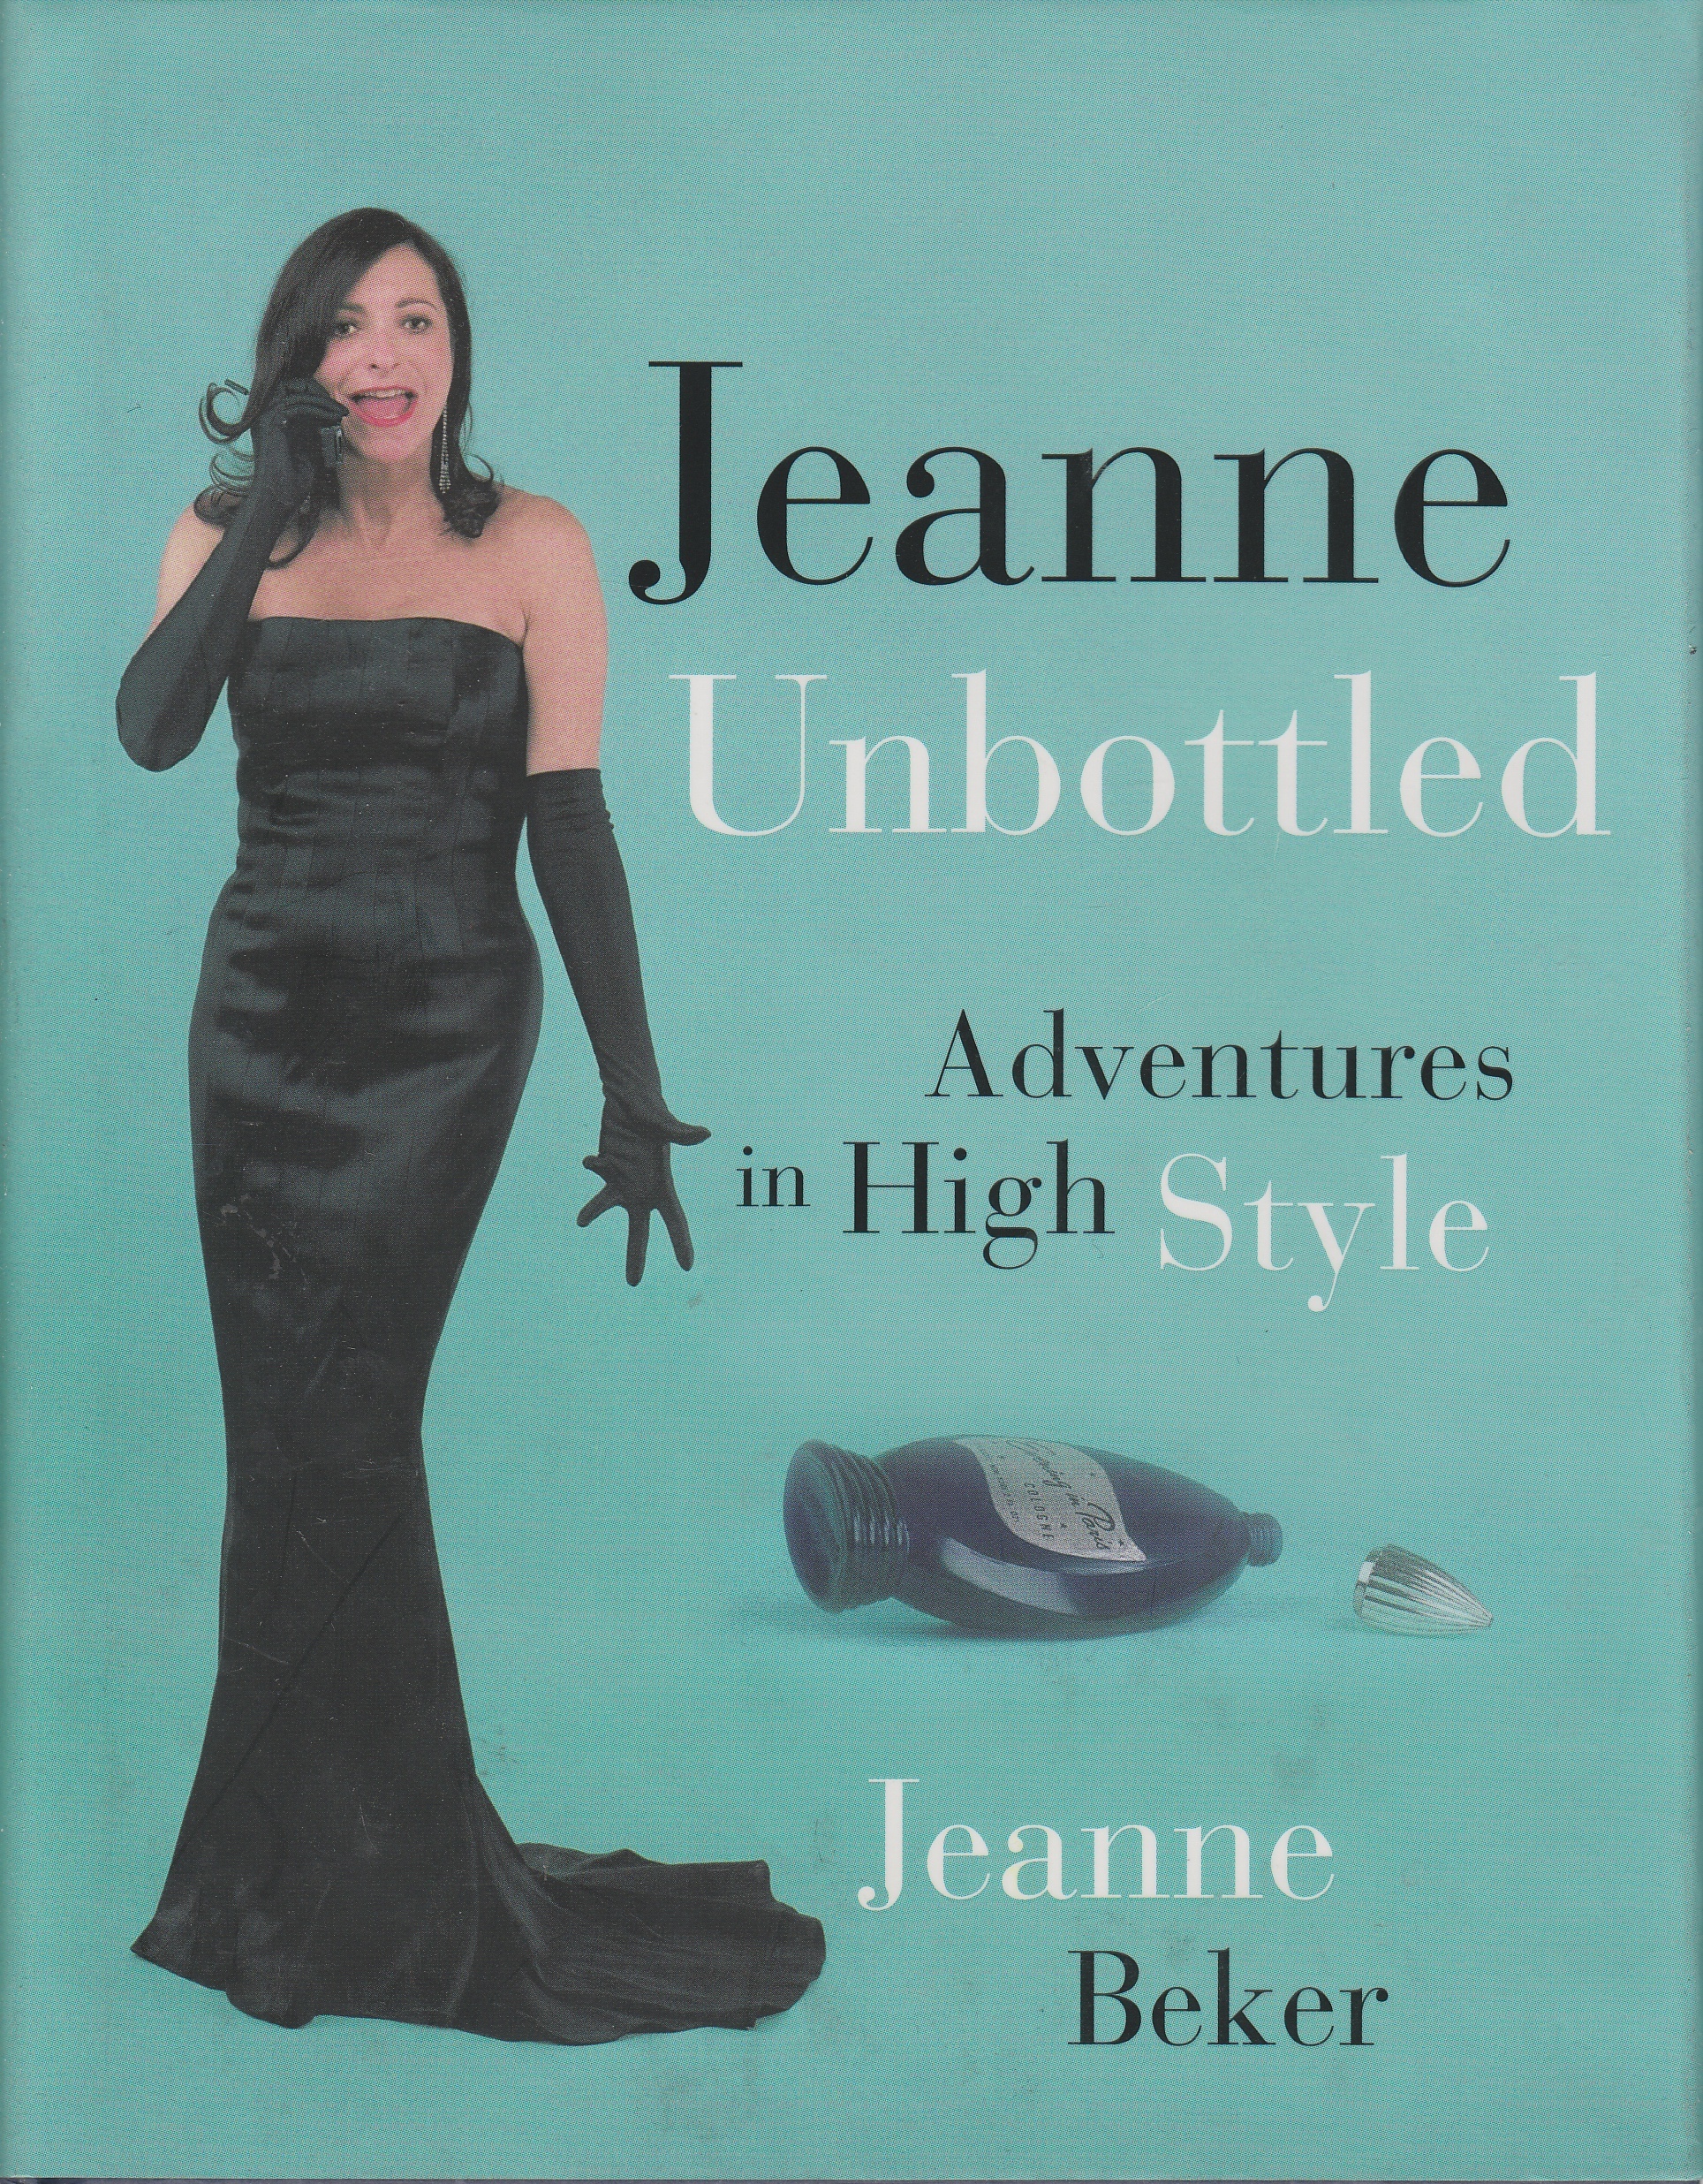 Image for Jeanne Unbottled Adventures in High Style